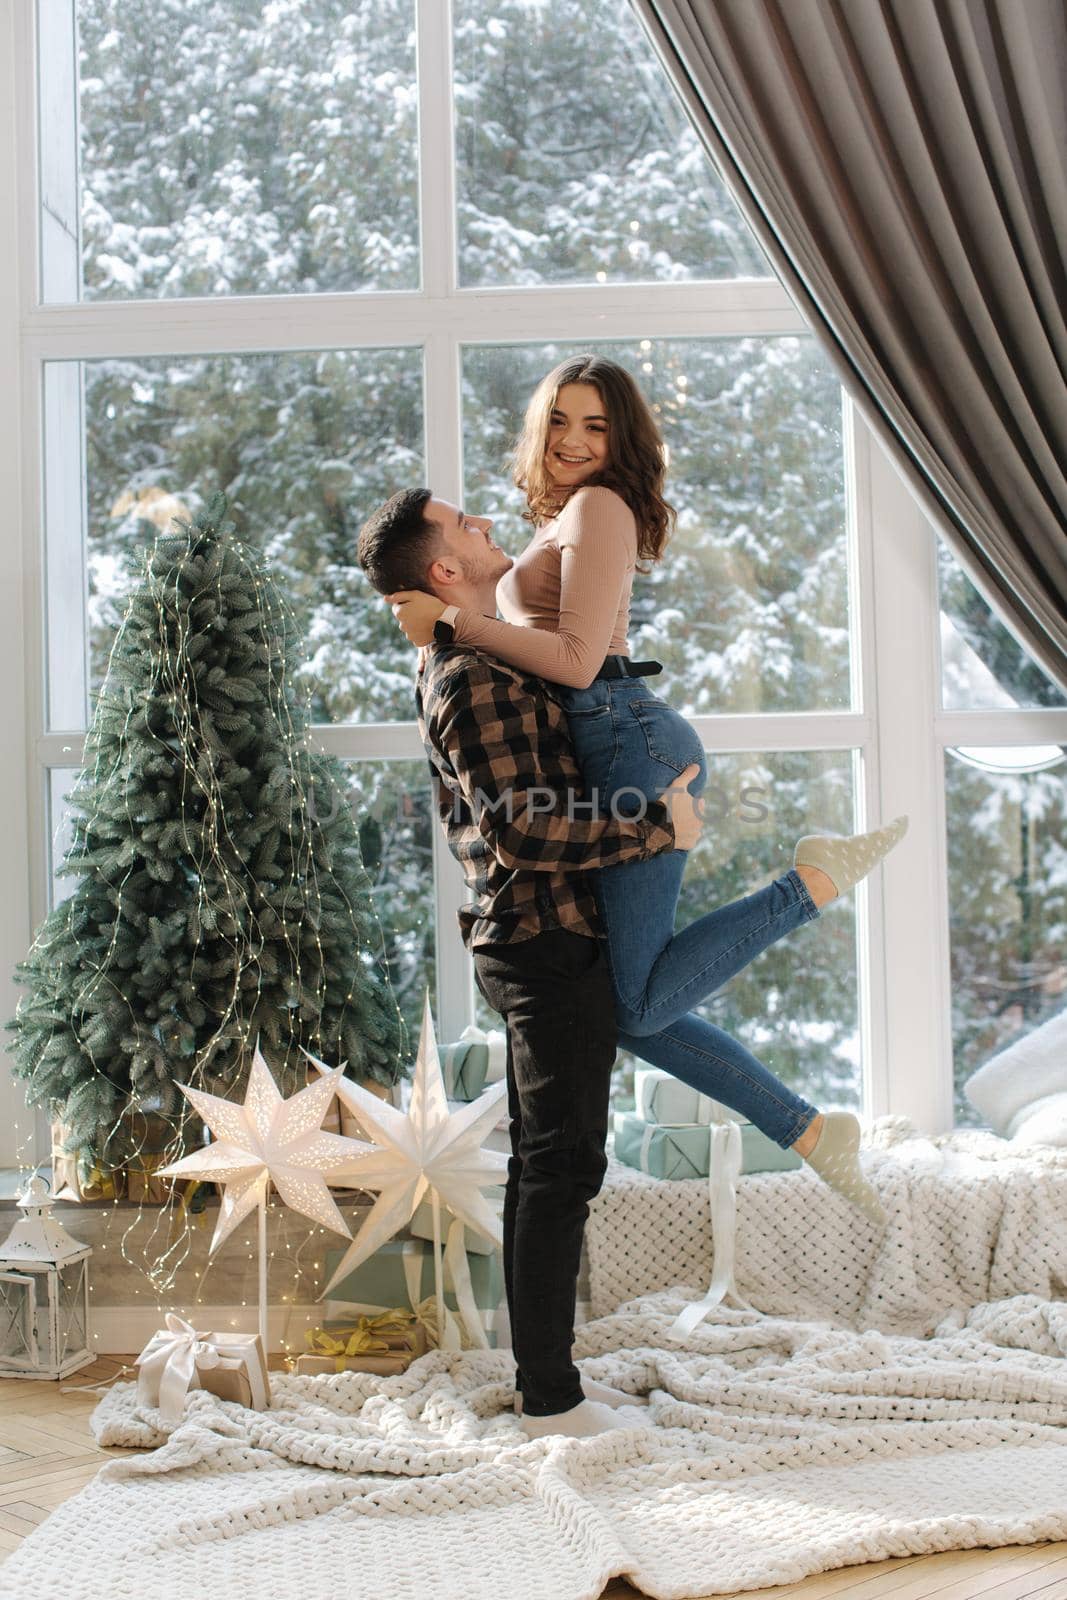 Handsome man with his girl friend enjoying of snowy weather outside and have fun near fir tree at home. by Gritsiv